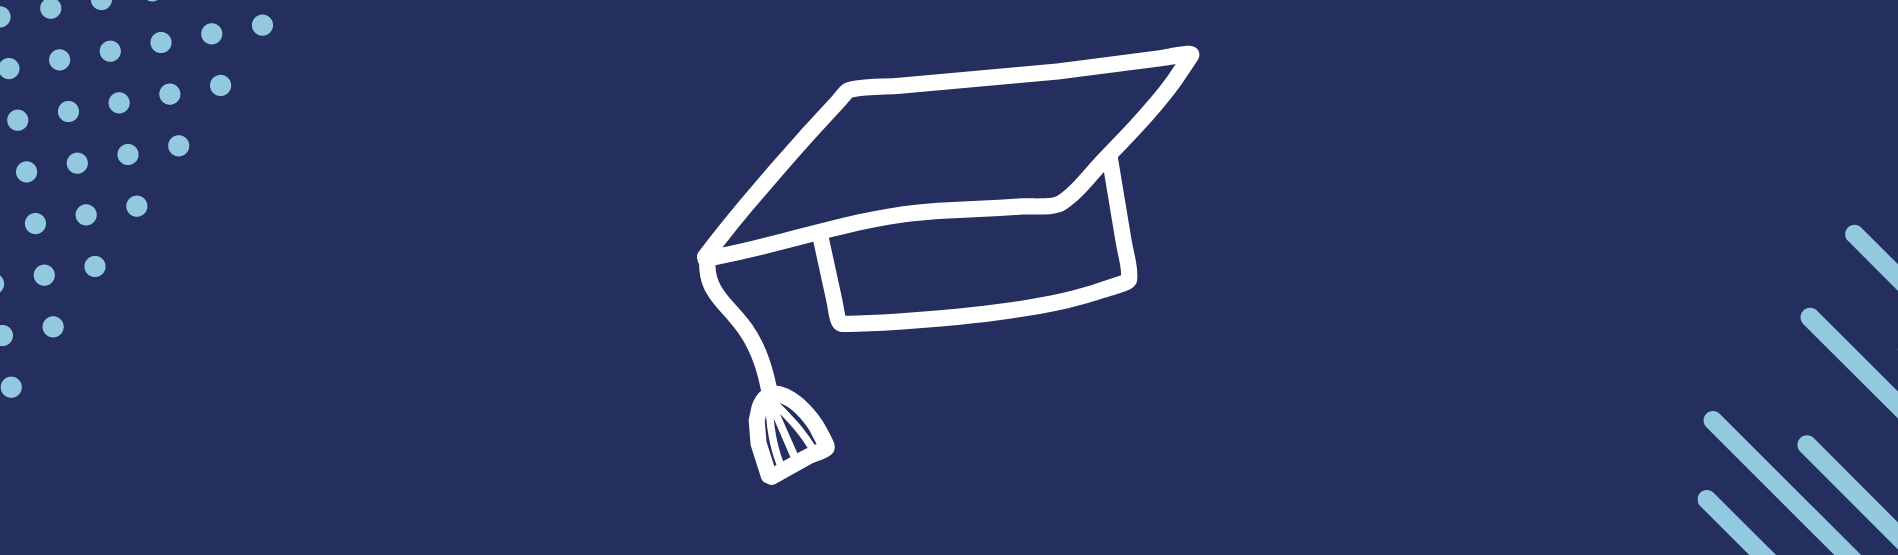 Image shows an icon of a student graduation cap